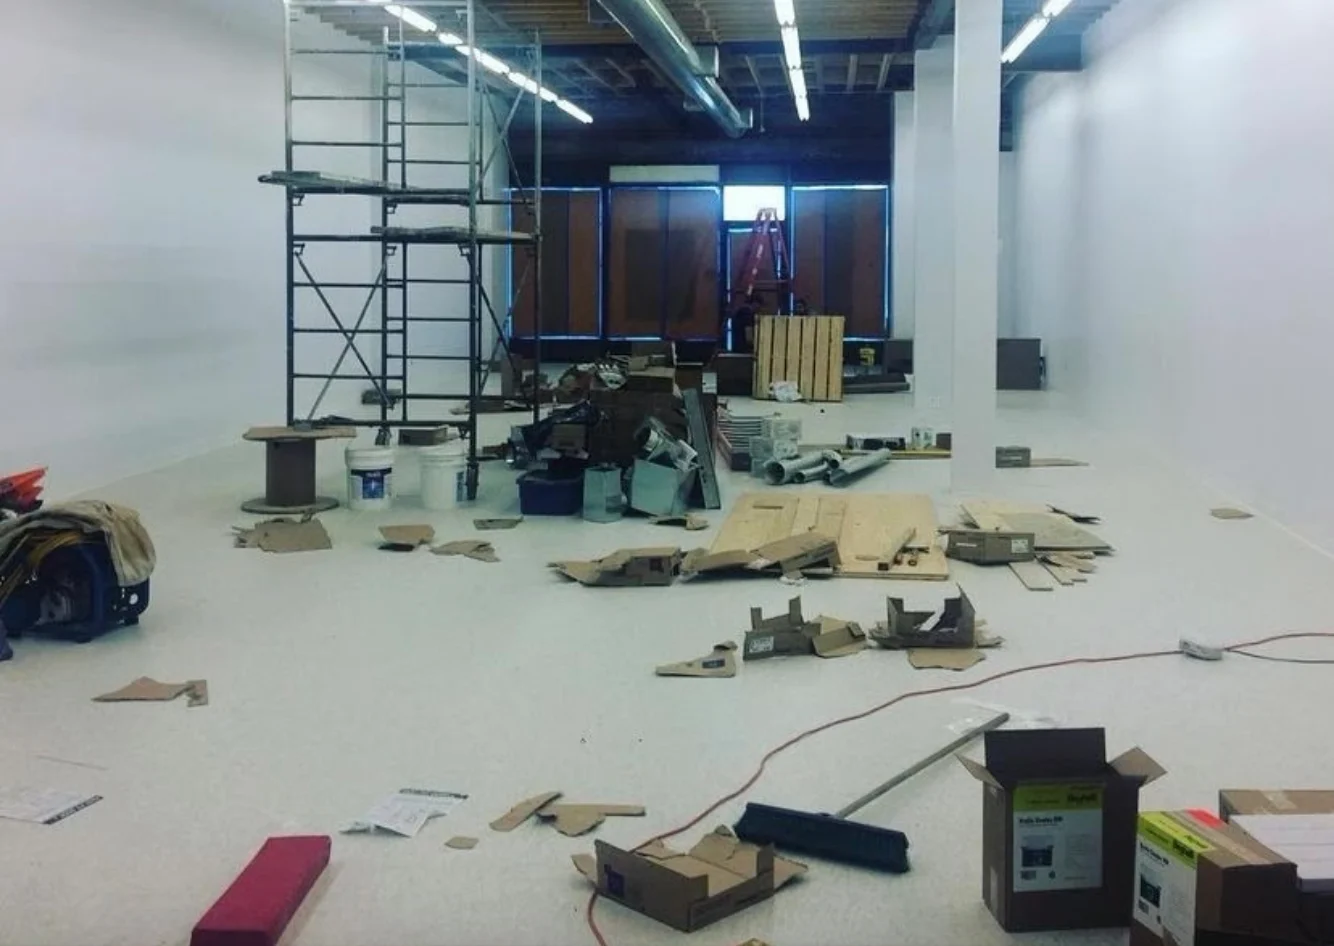 Marine Kickboxing studios as it was being constructed in June 2017 (Provided)